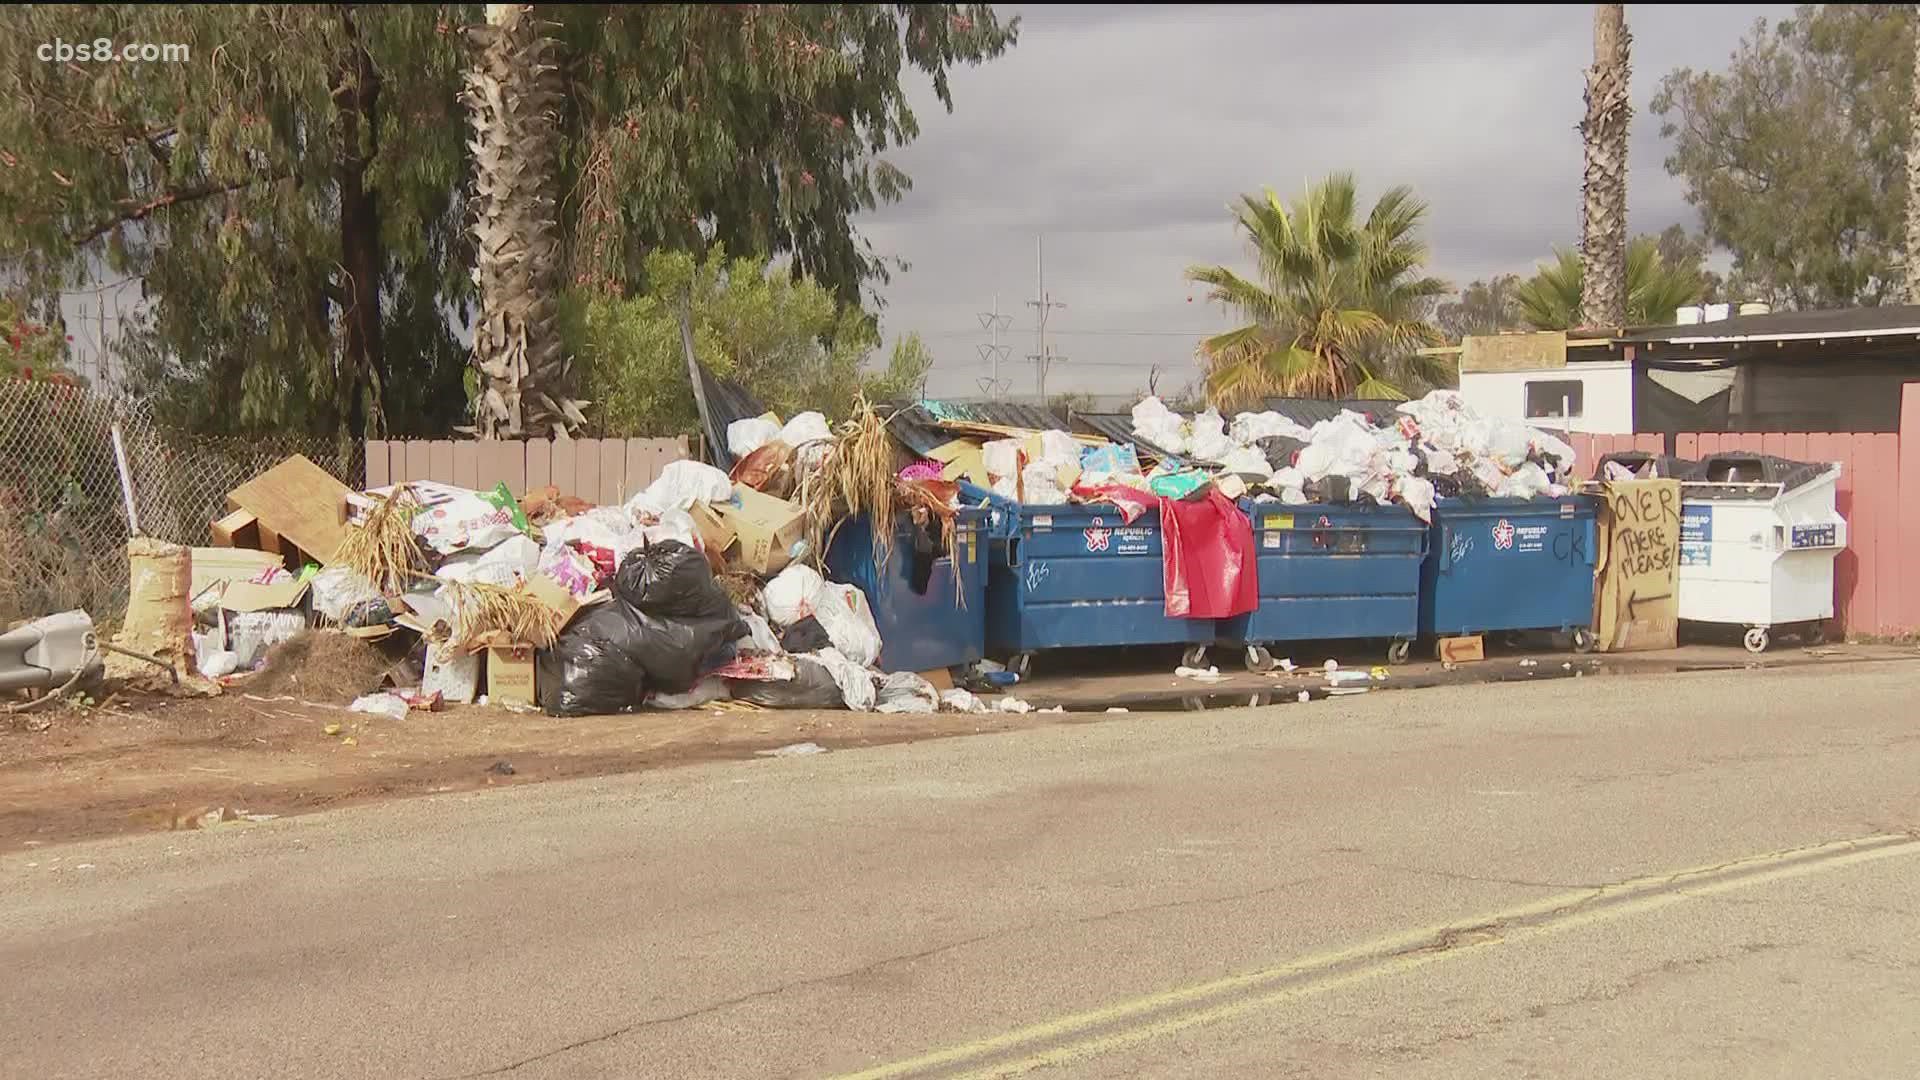 Sanitation workers strike in Chula Vista, San Diego continues